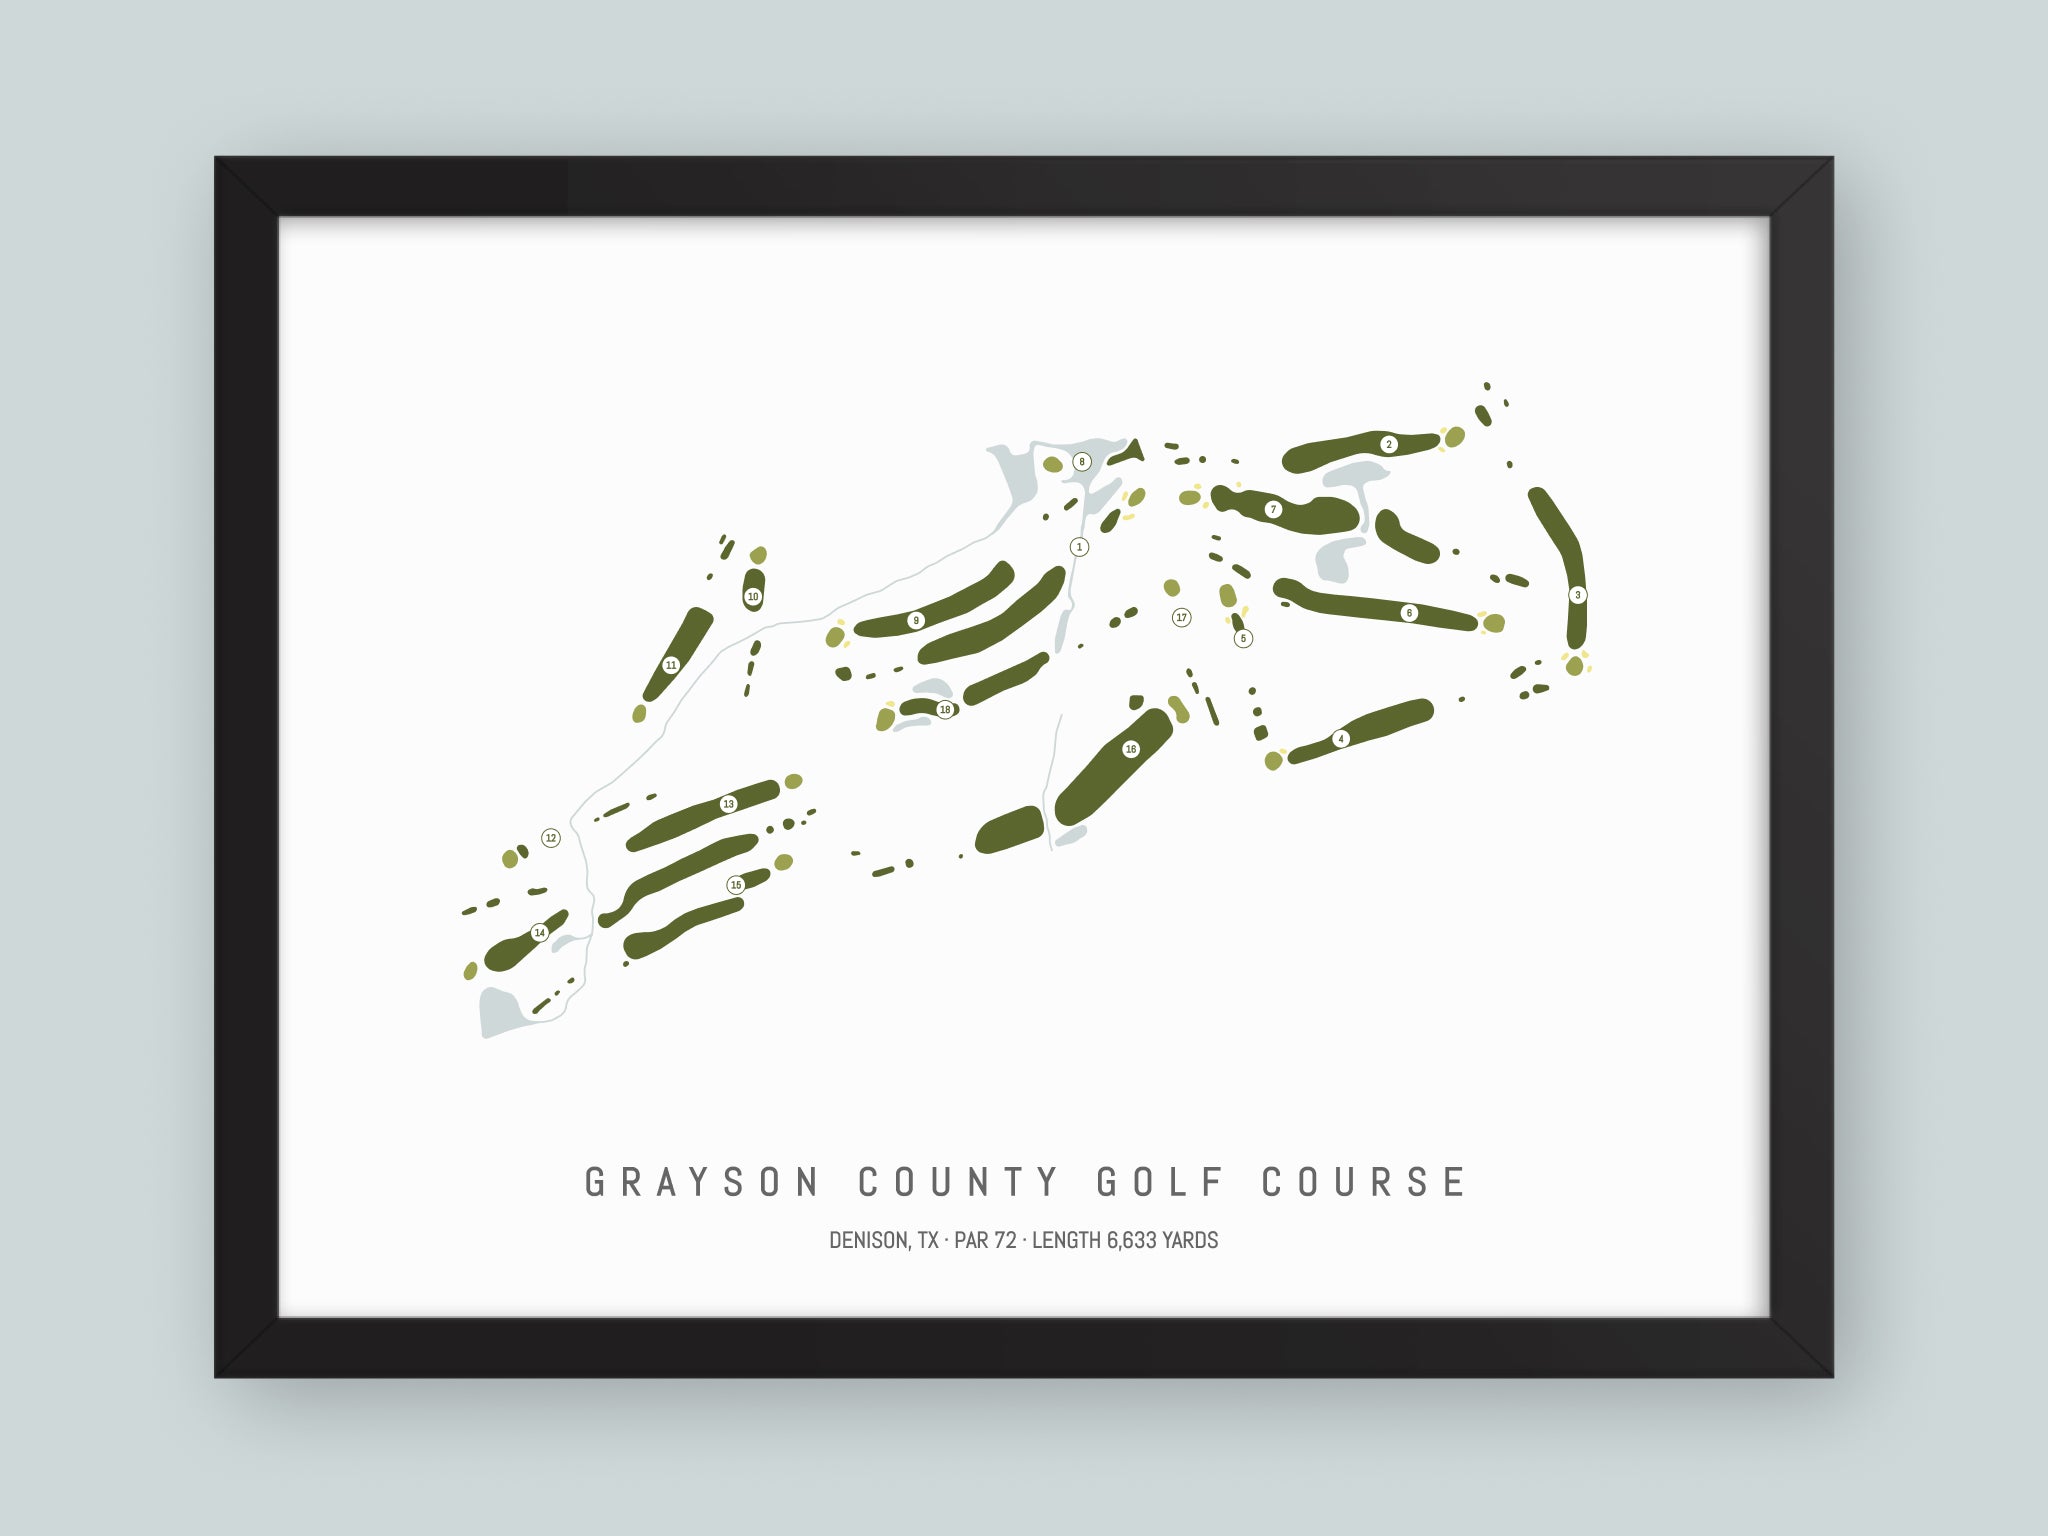 Grayson-County-Golf-Course-TX--Black-Frame-24x18-With-Hole-Numbers